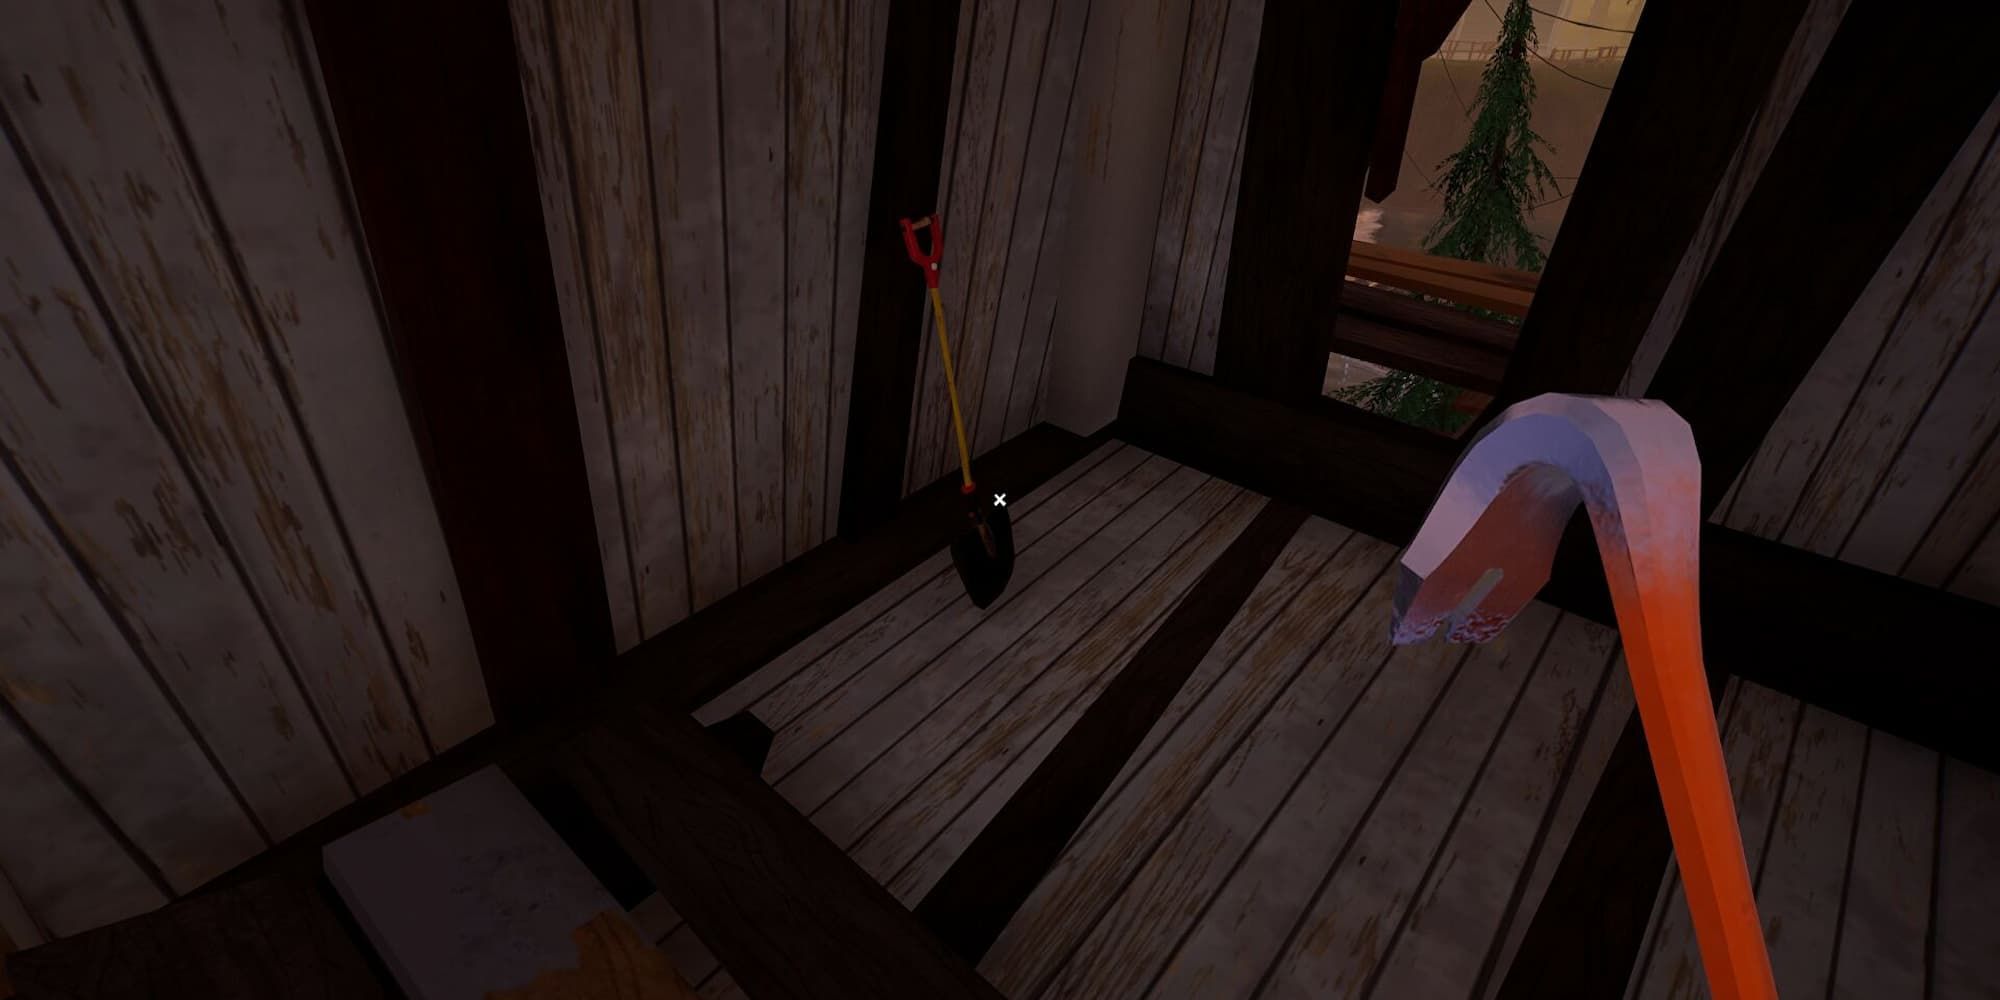 The player approaches a Shovel with their Crowbar in hand.